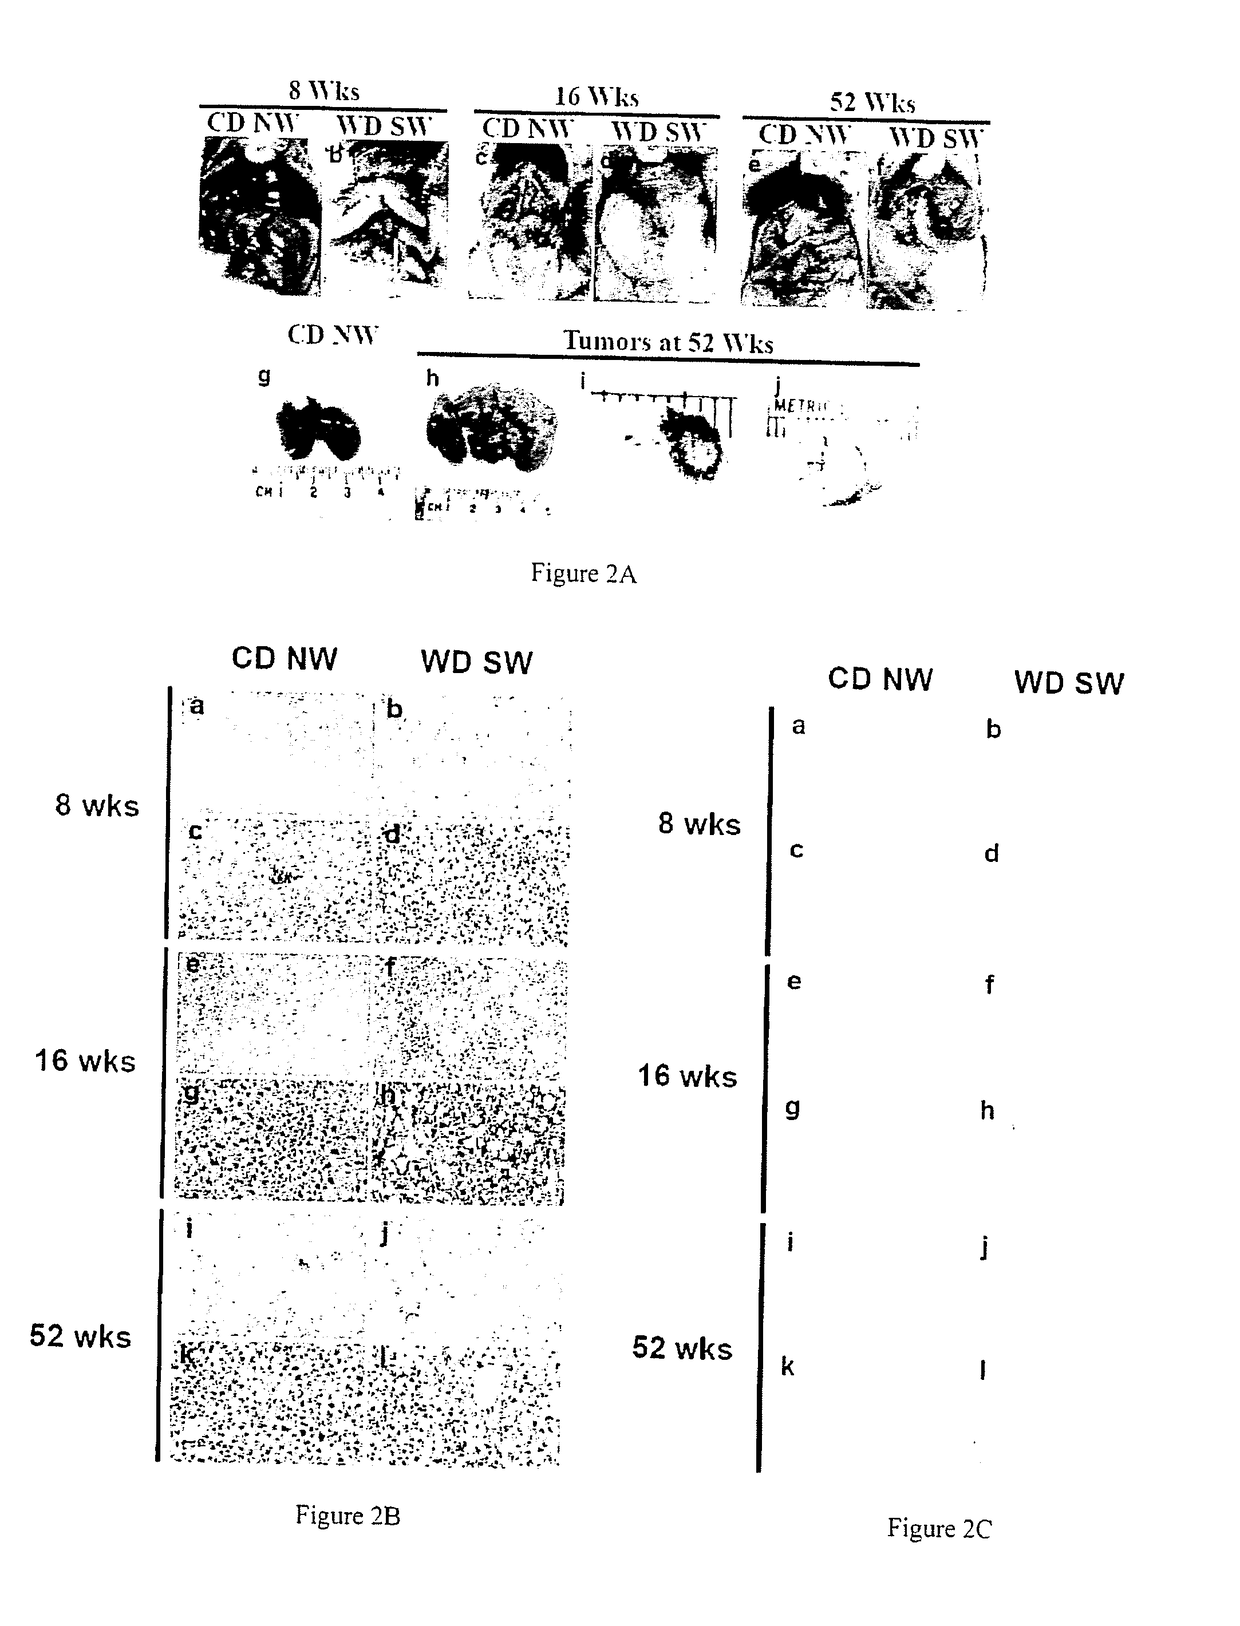 A mouse model of nonalcoholic steatohepatitis and uses thereof